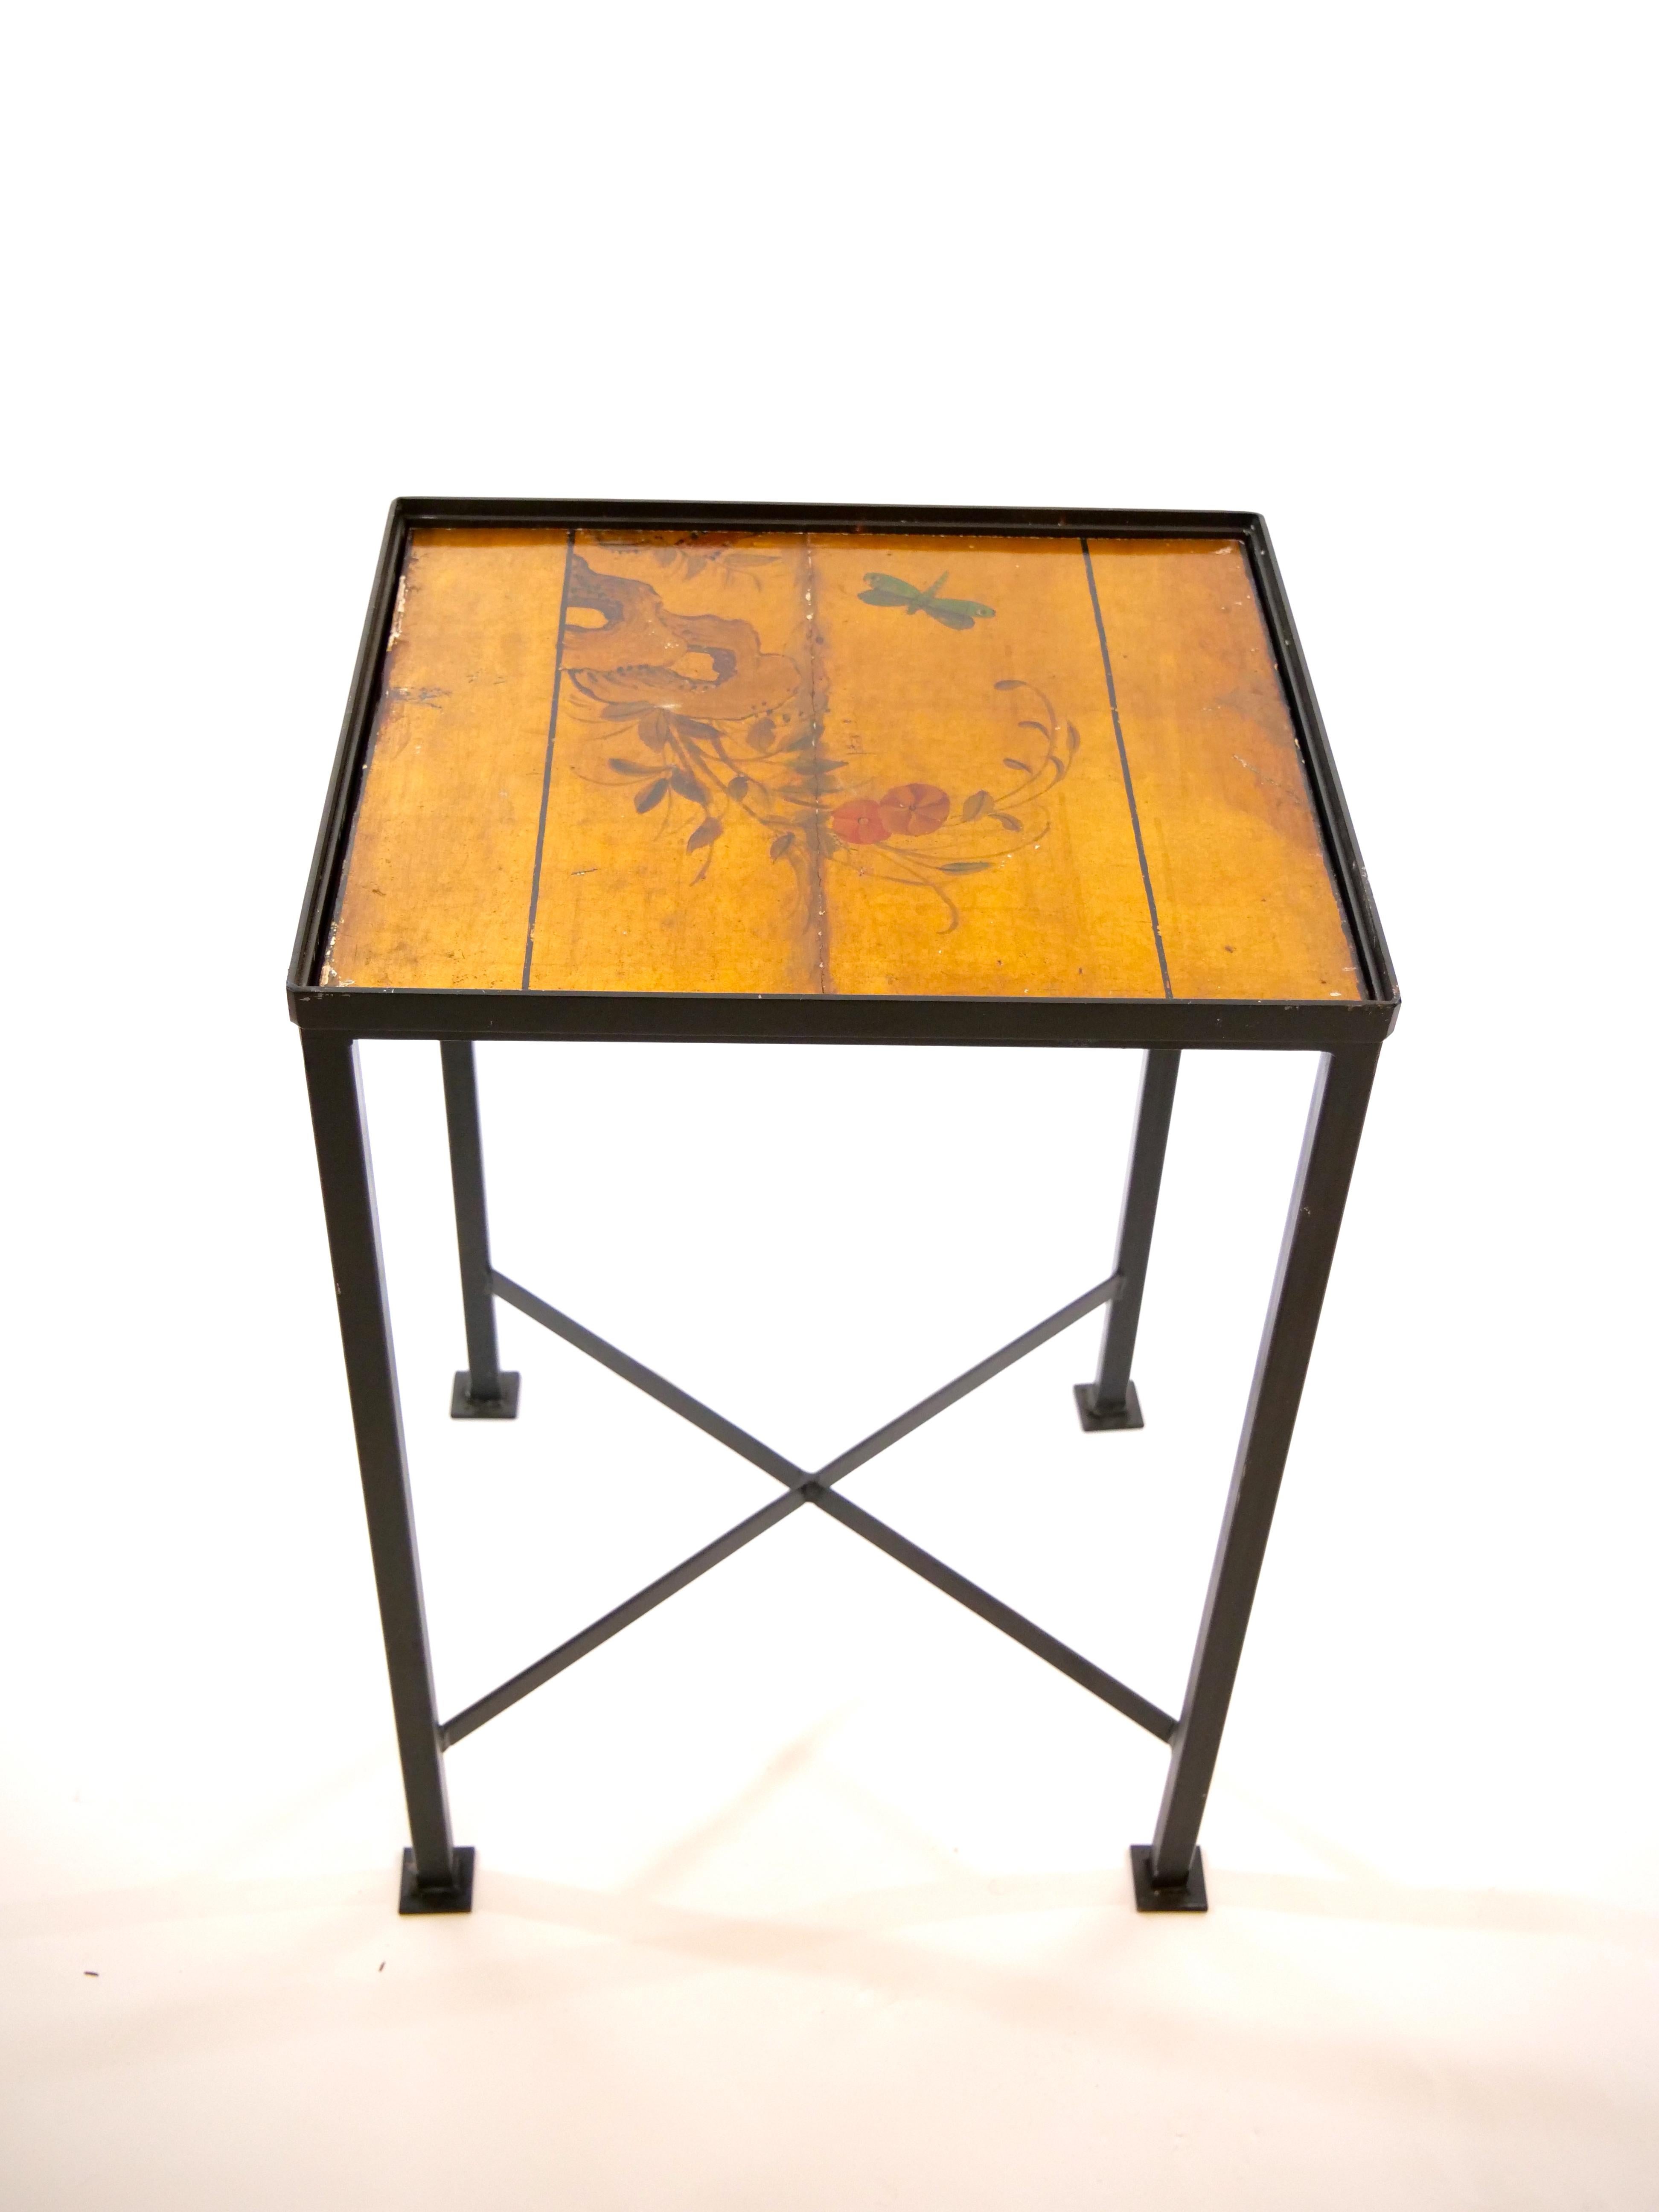 Hand-Crafted Vintage Wrought Iron / Painted Wood Top Side Tables For Sale